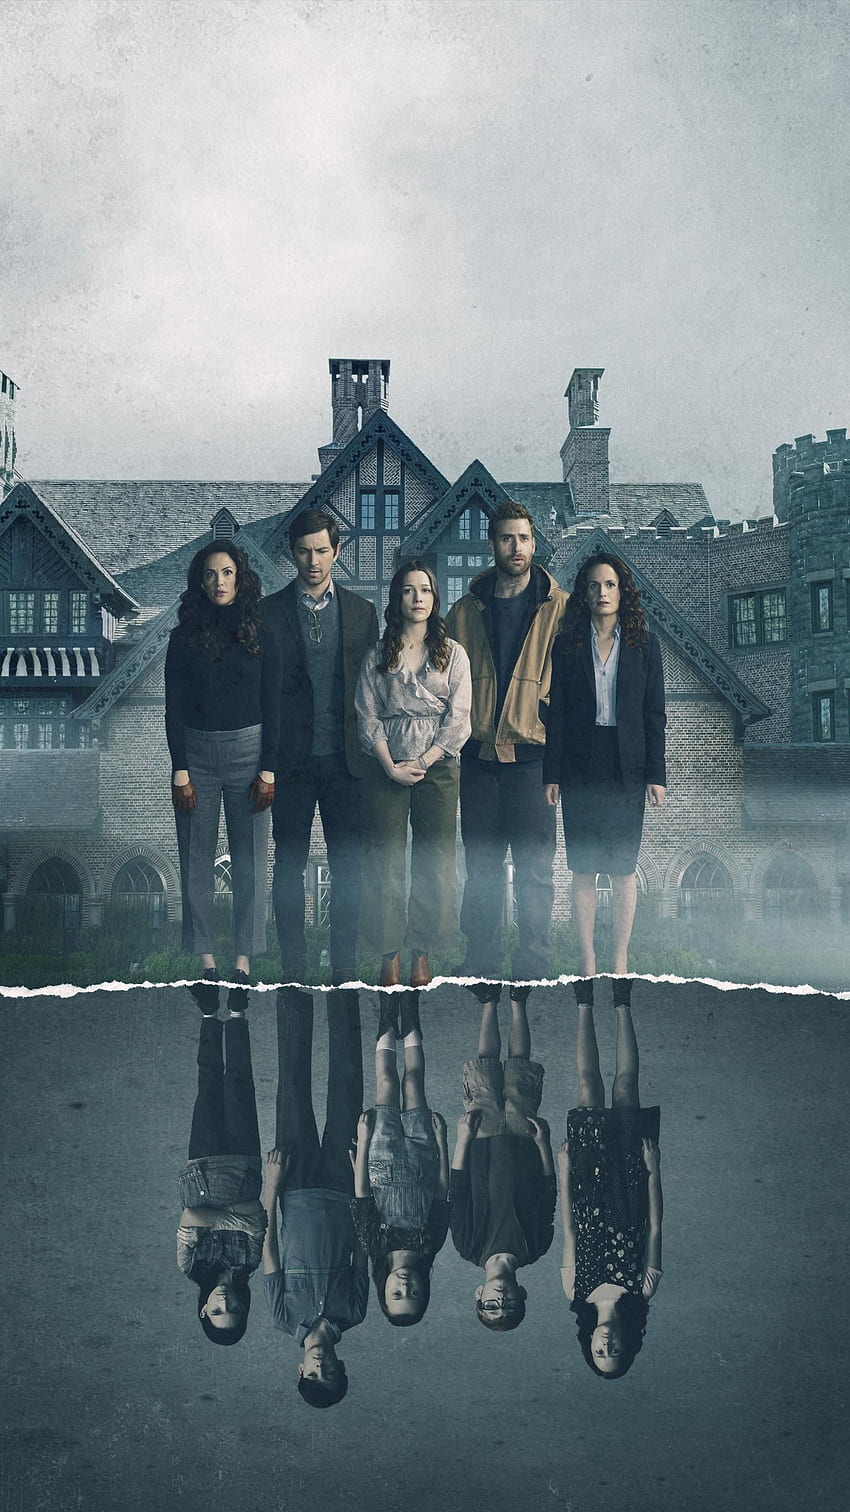 The Haunting of Hill House Phone . Moviemania. House on a hill, House on haunted hill, Haunting, The Haunting Of Bly Manor HD phone wallpaper